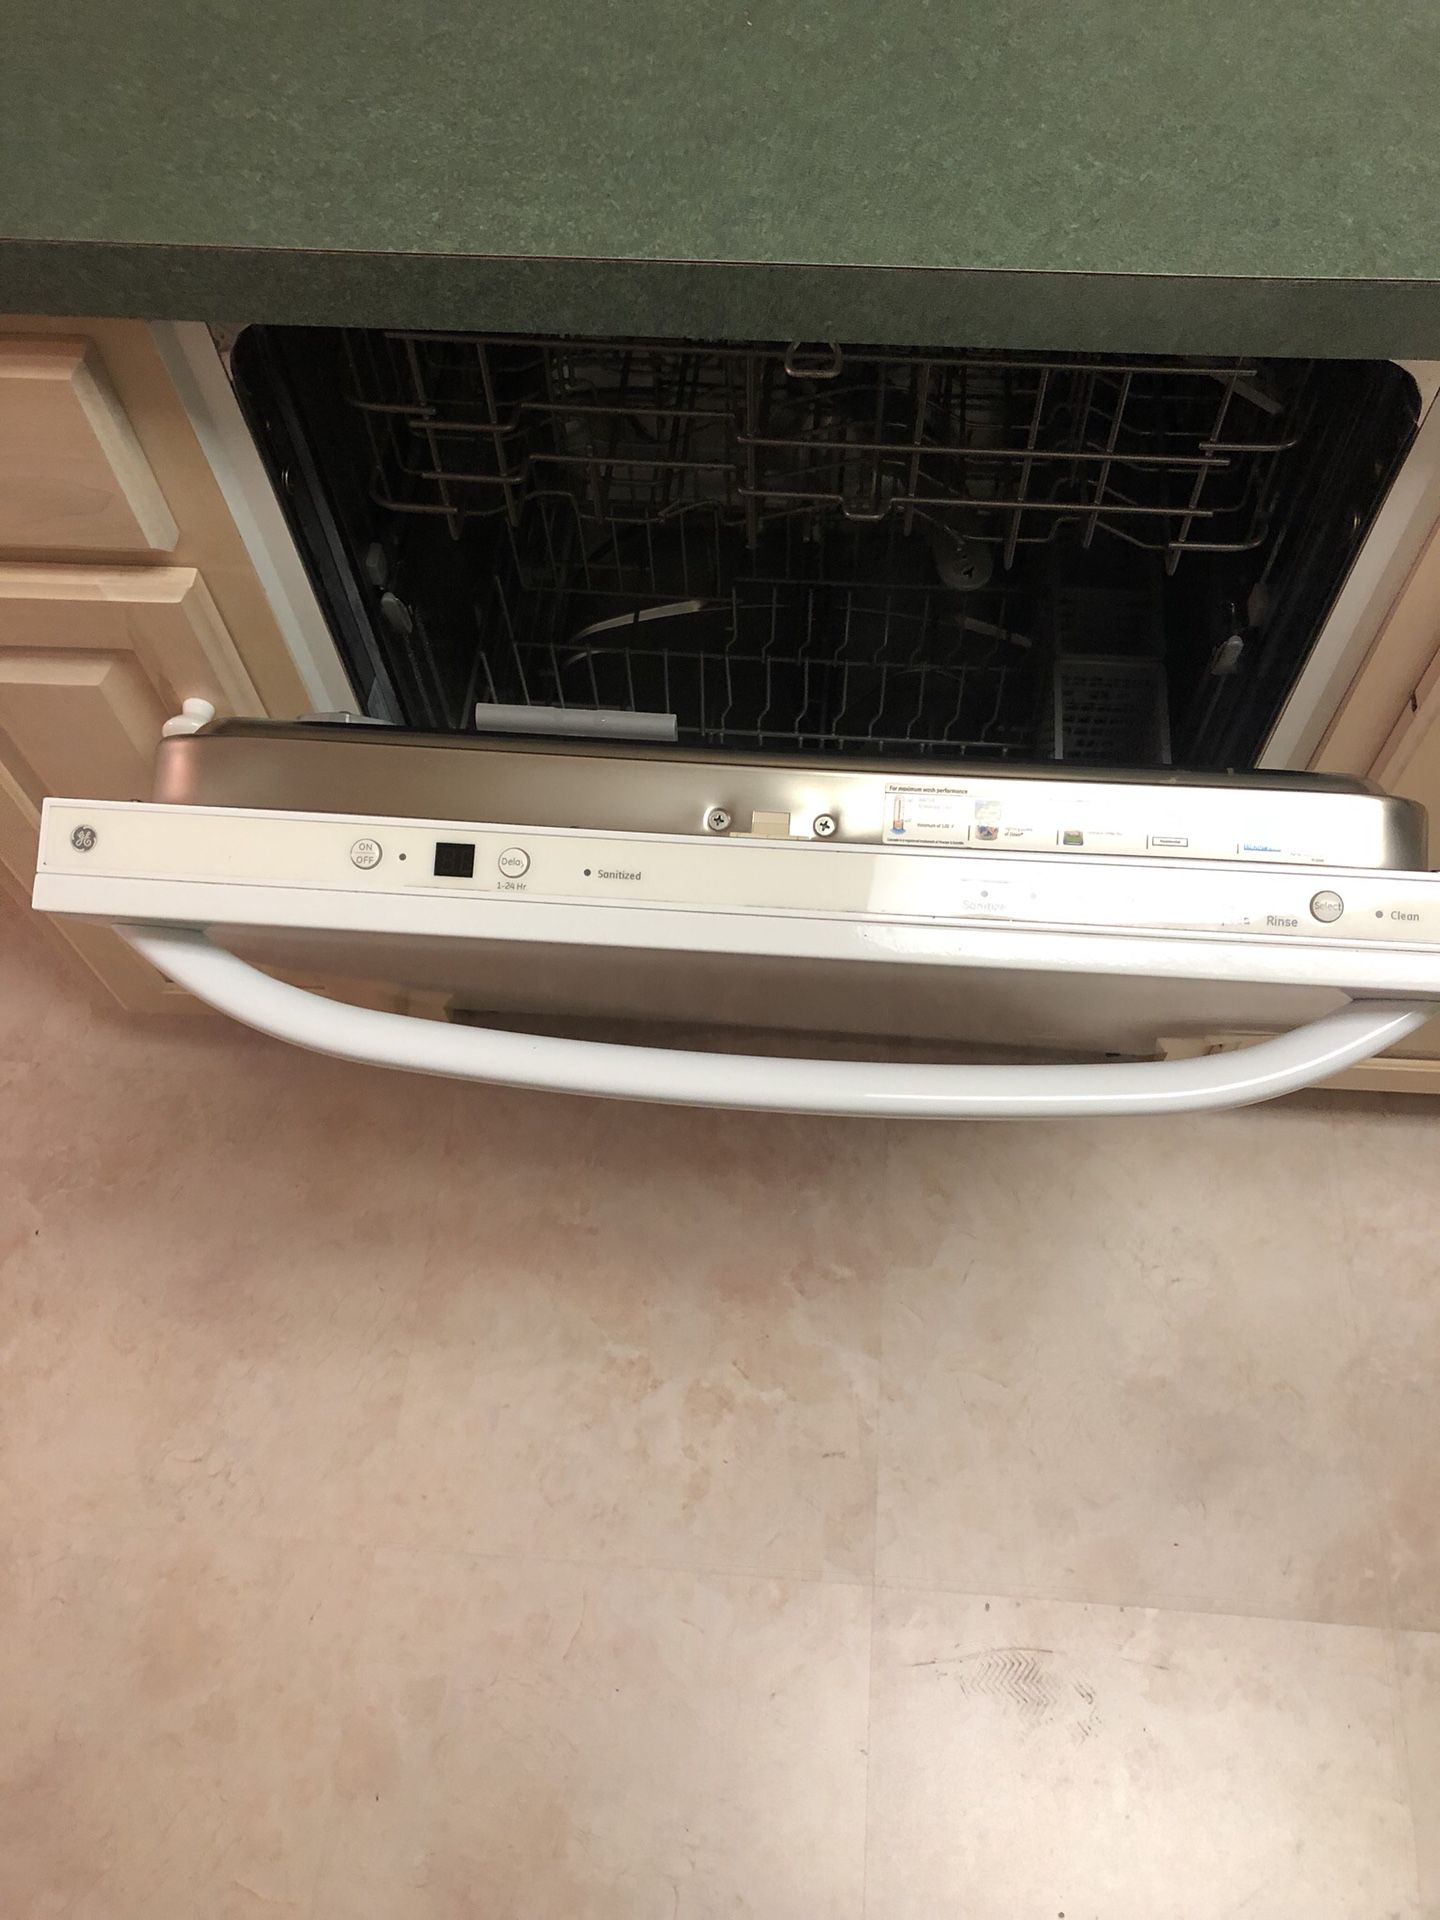 LG Microwave and Dishwasher